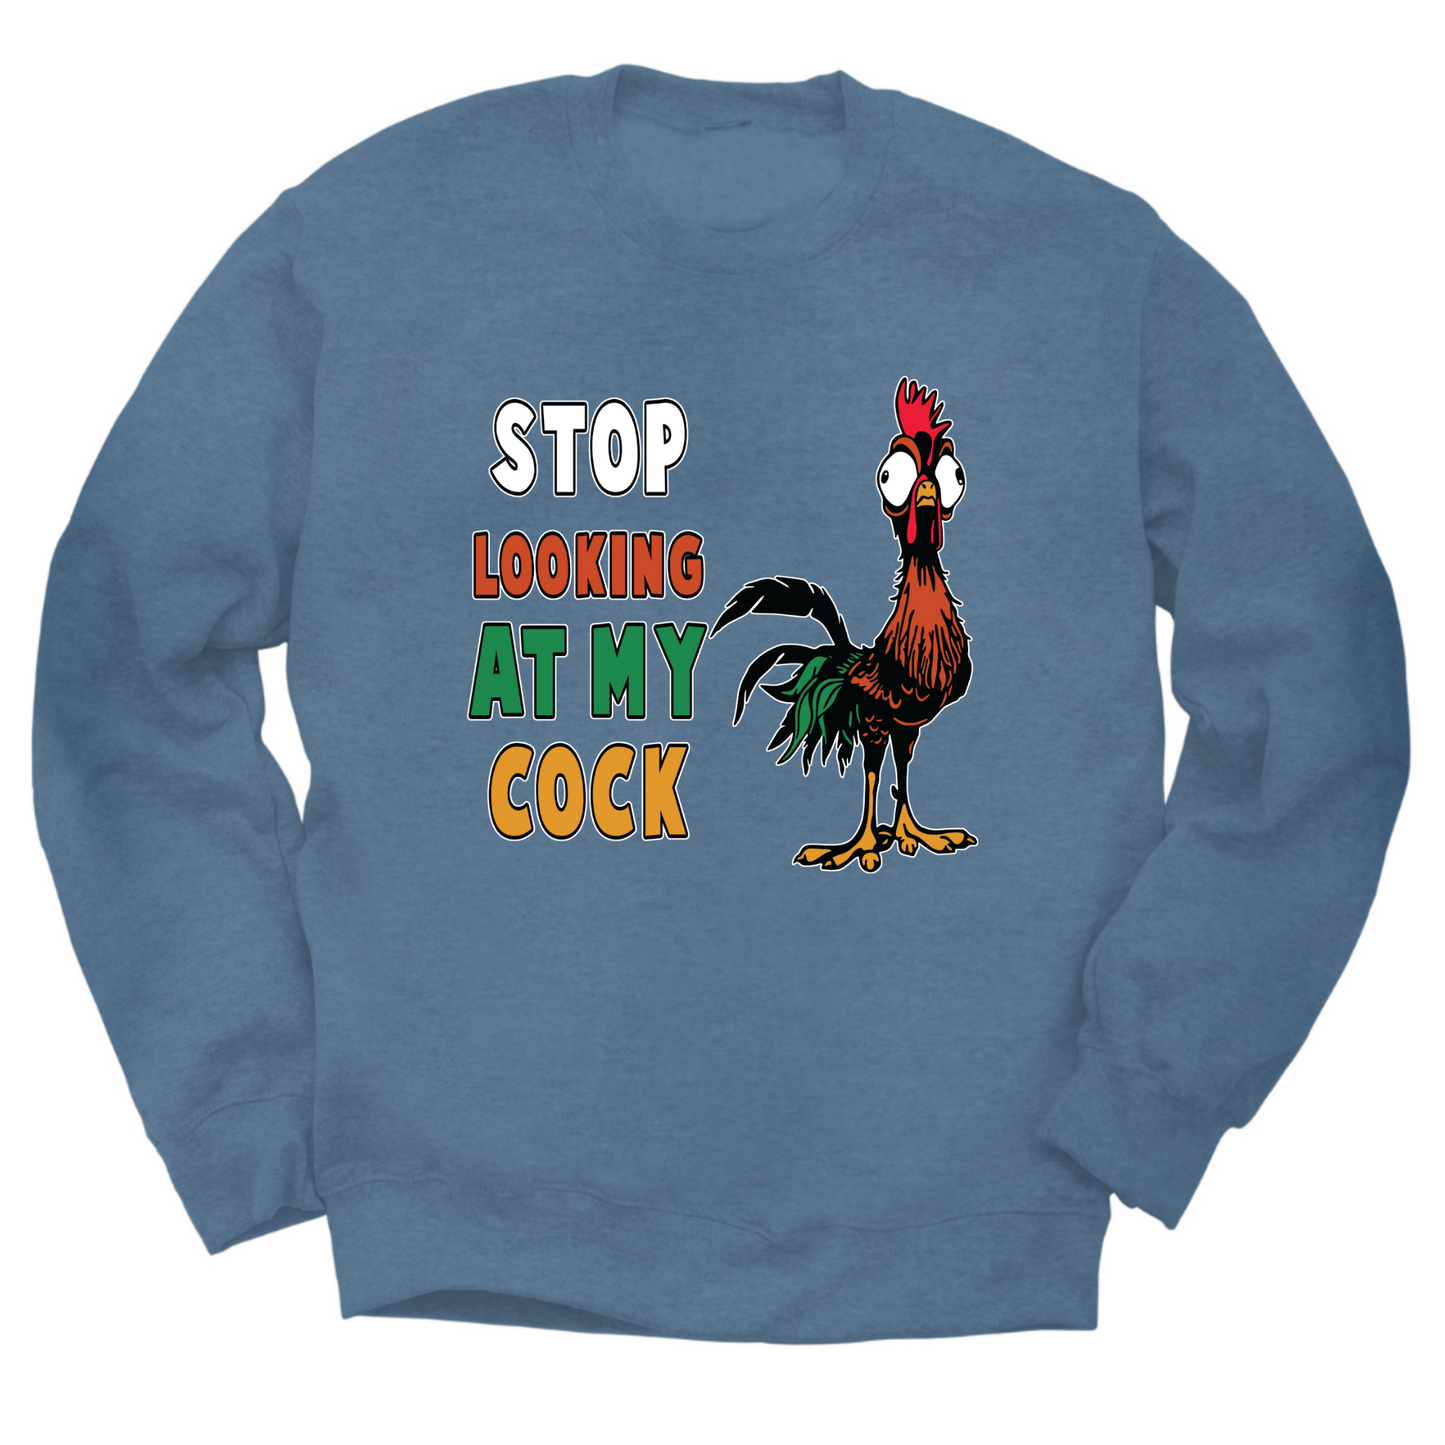 Stop Looking At My Cock Crewneck Sweater